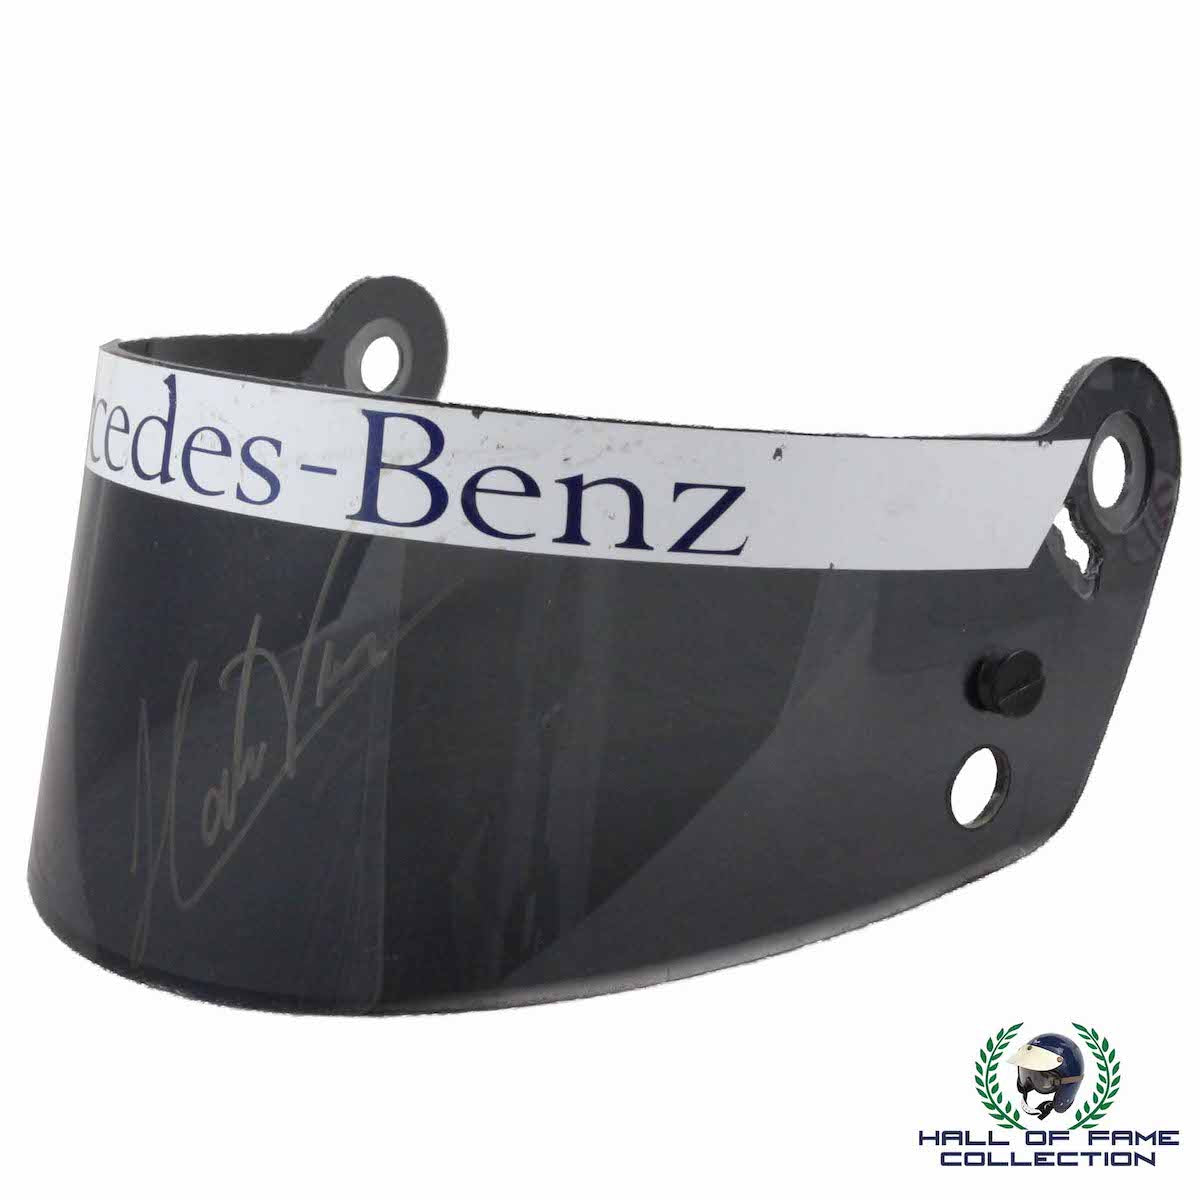 1999 Helio Castroneves Signed Mercedes IndyCar Visor